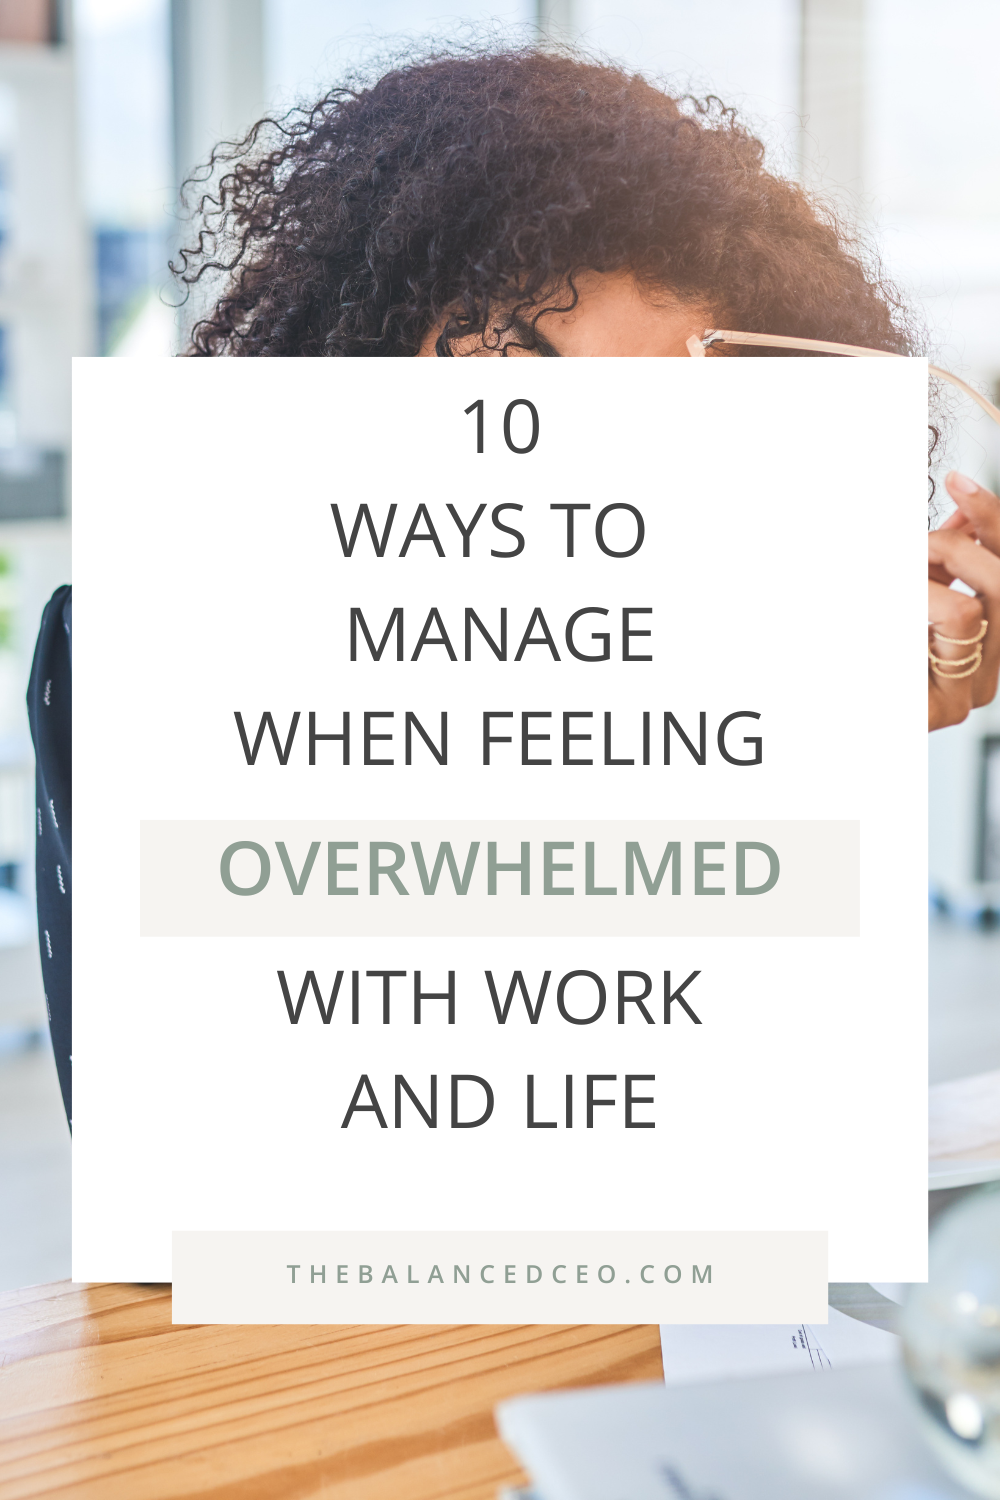 10 Ways to Manage When Feeling Overwhelmed with Work and Life